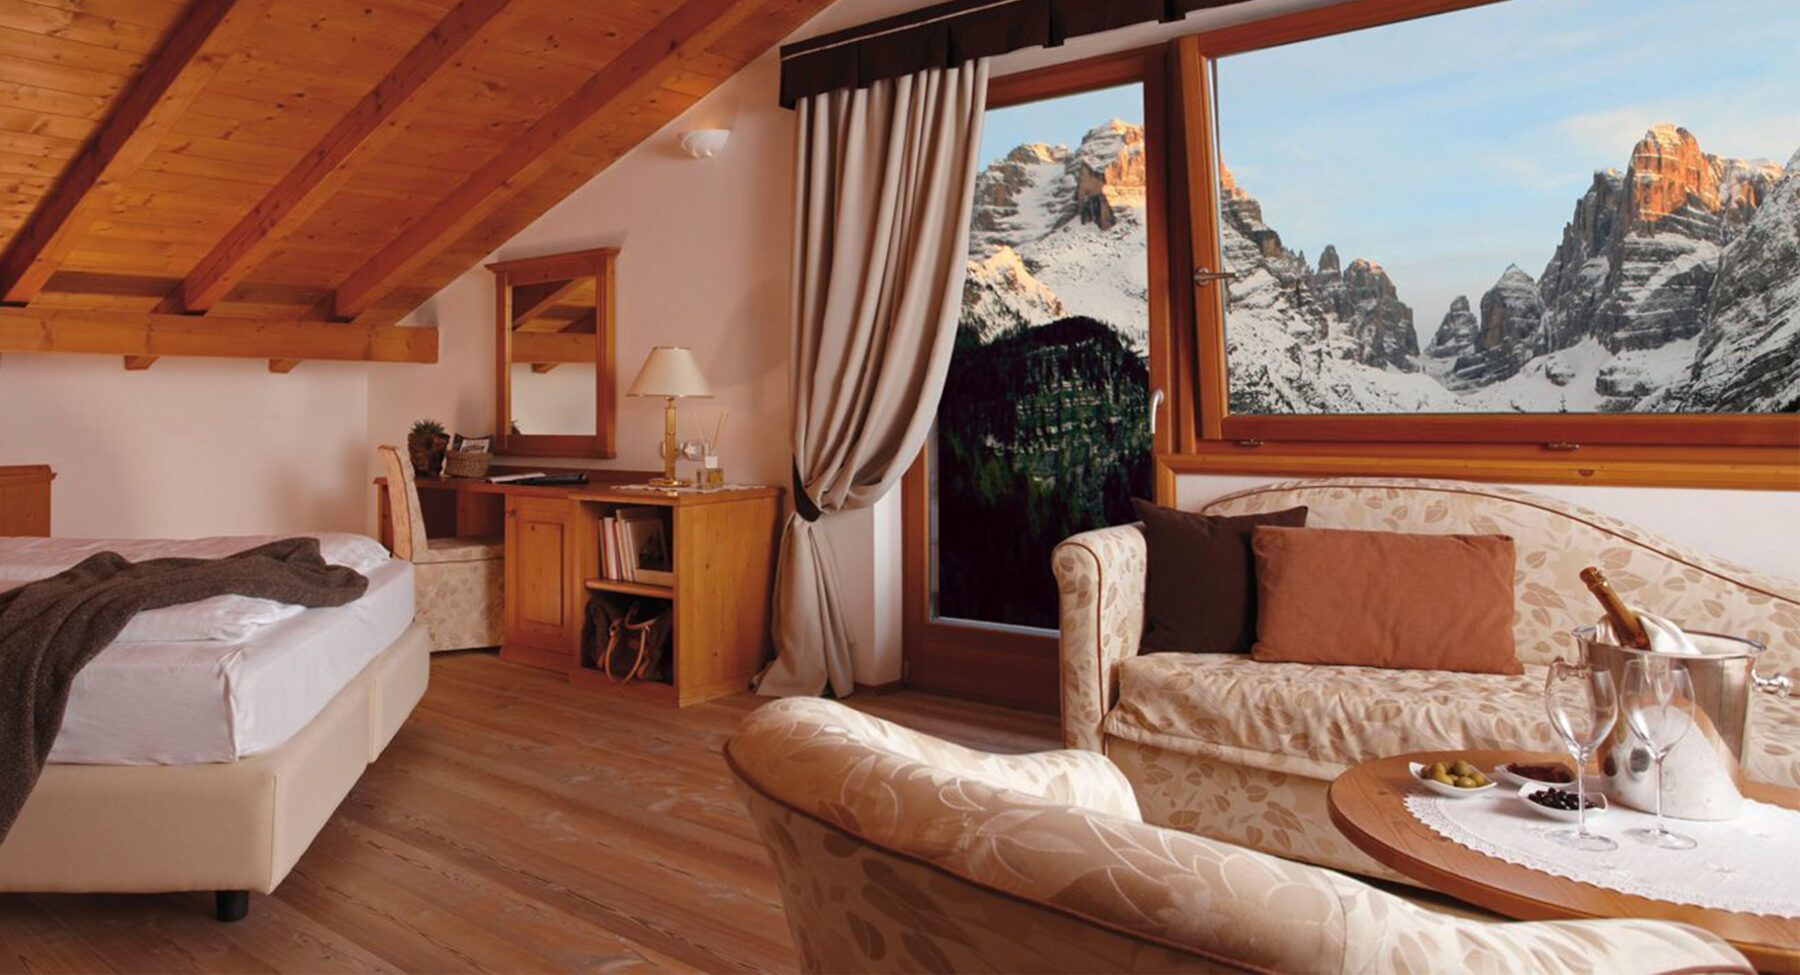 Interior of a bedroom at a luxury ski hotel in Italy